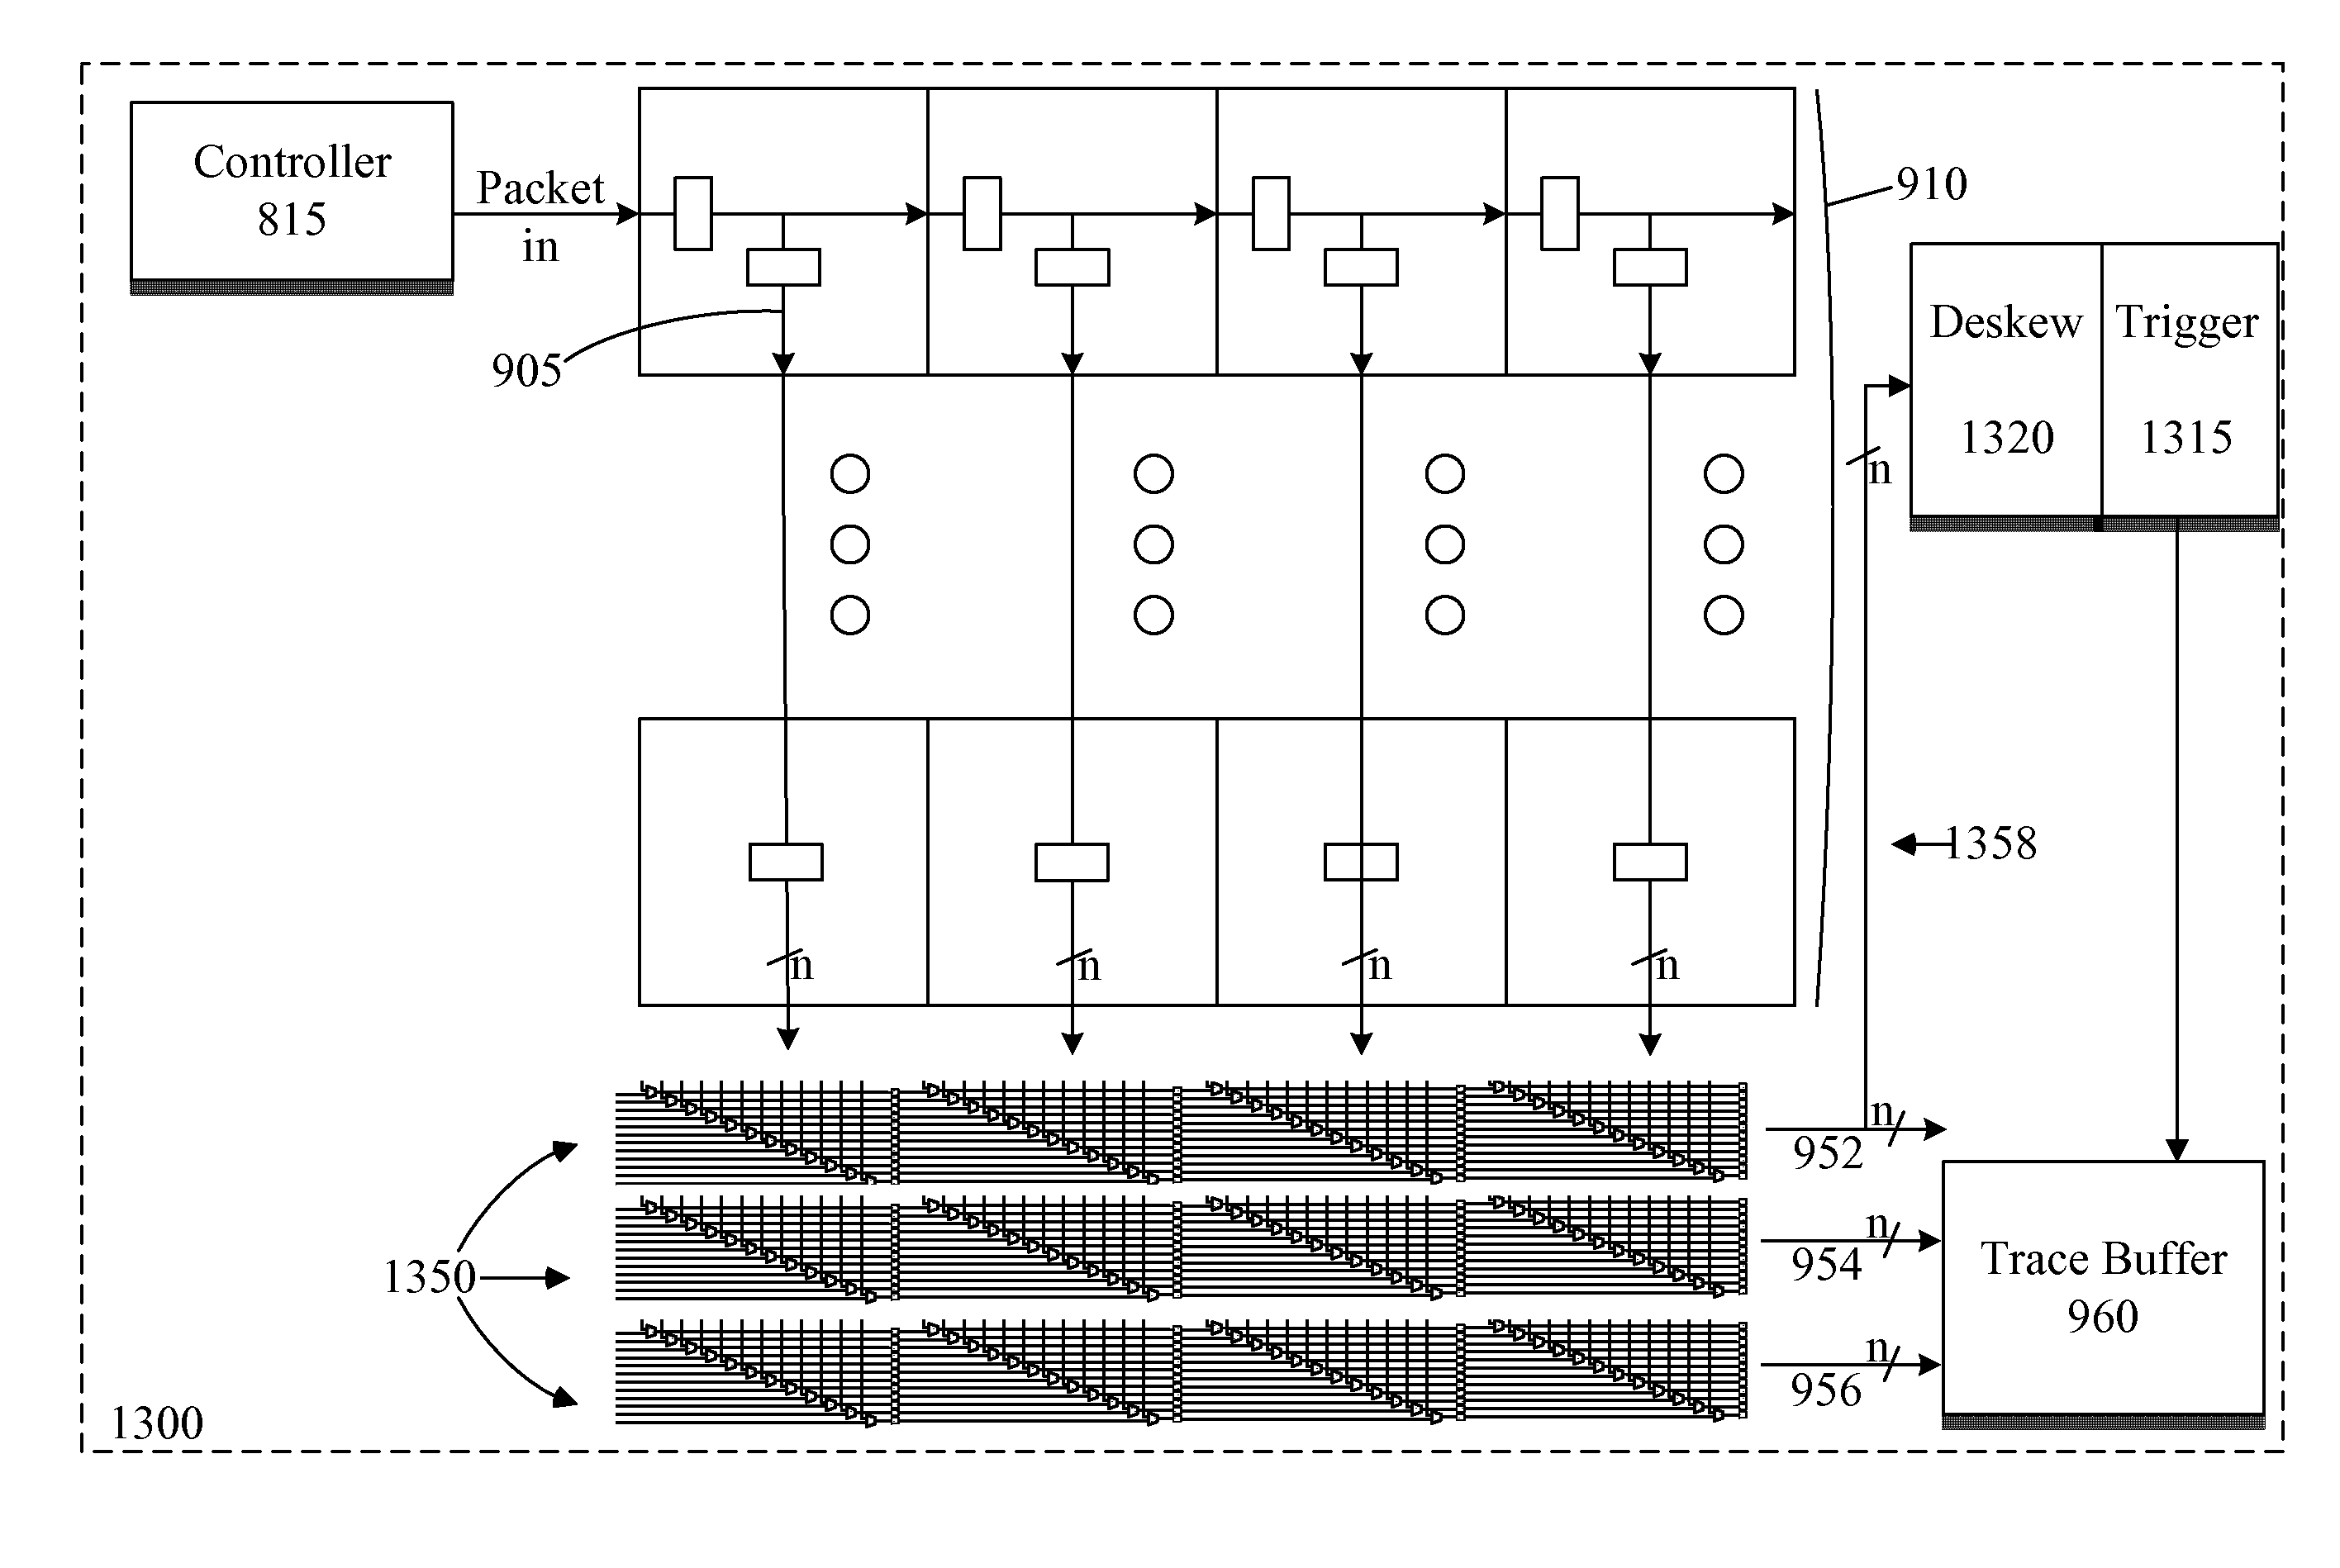 Transport network for a configurable IC